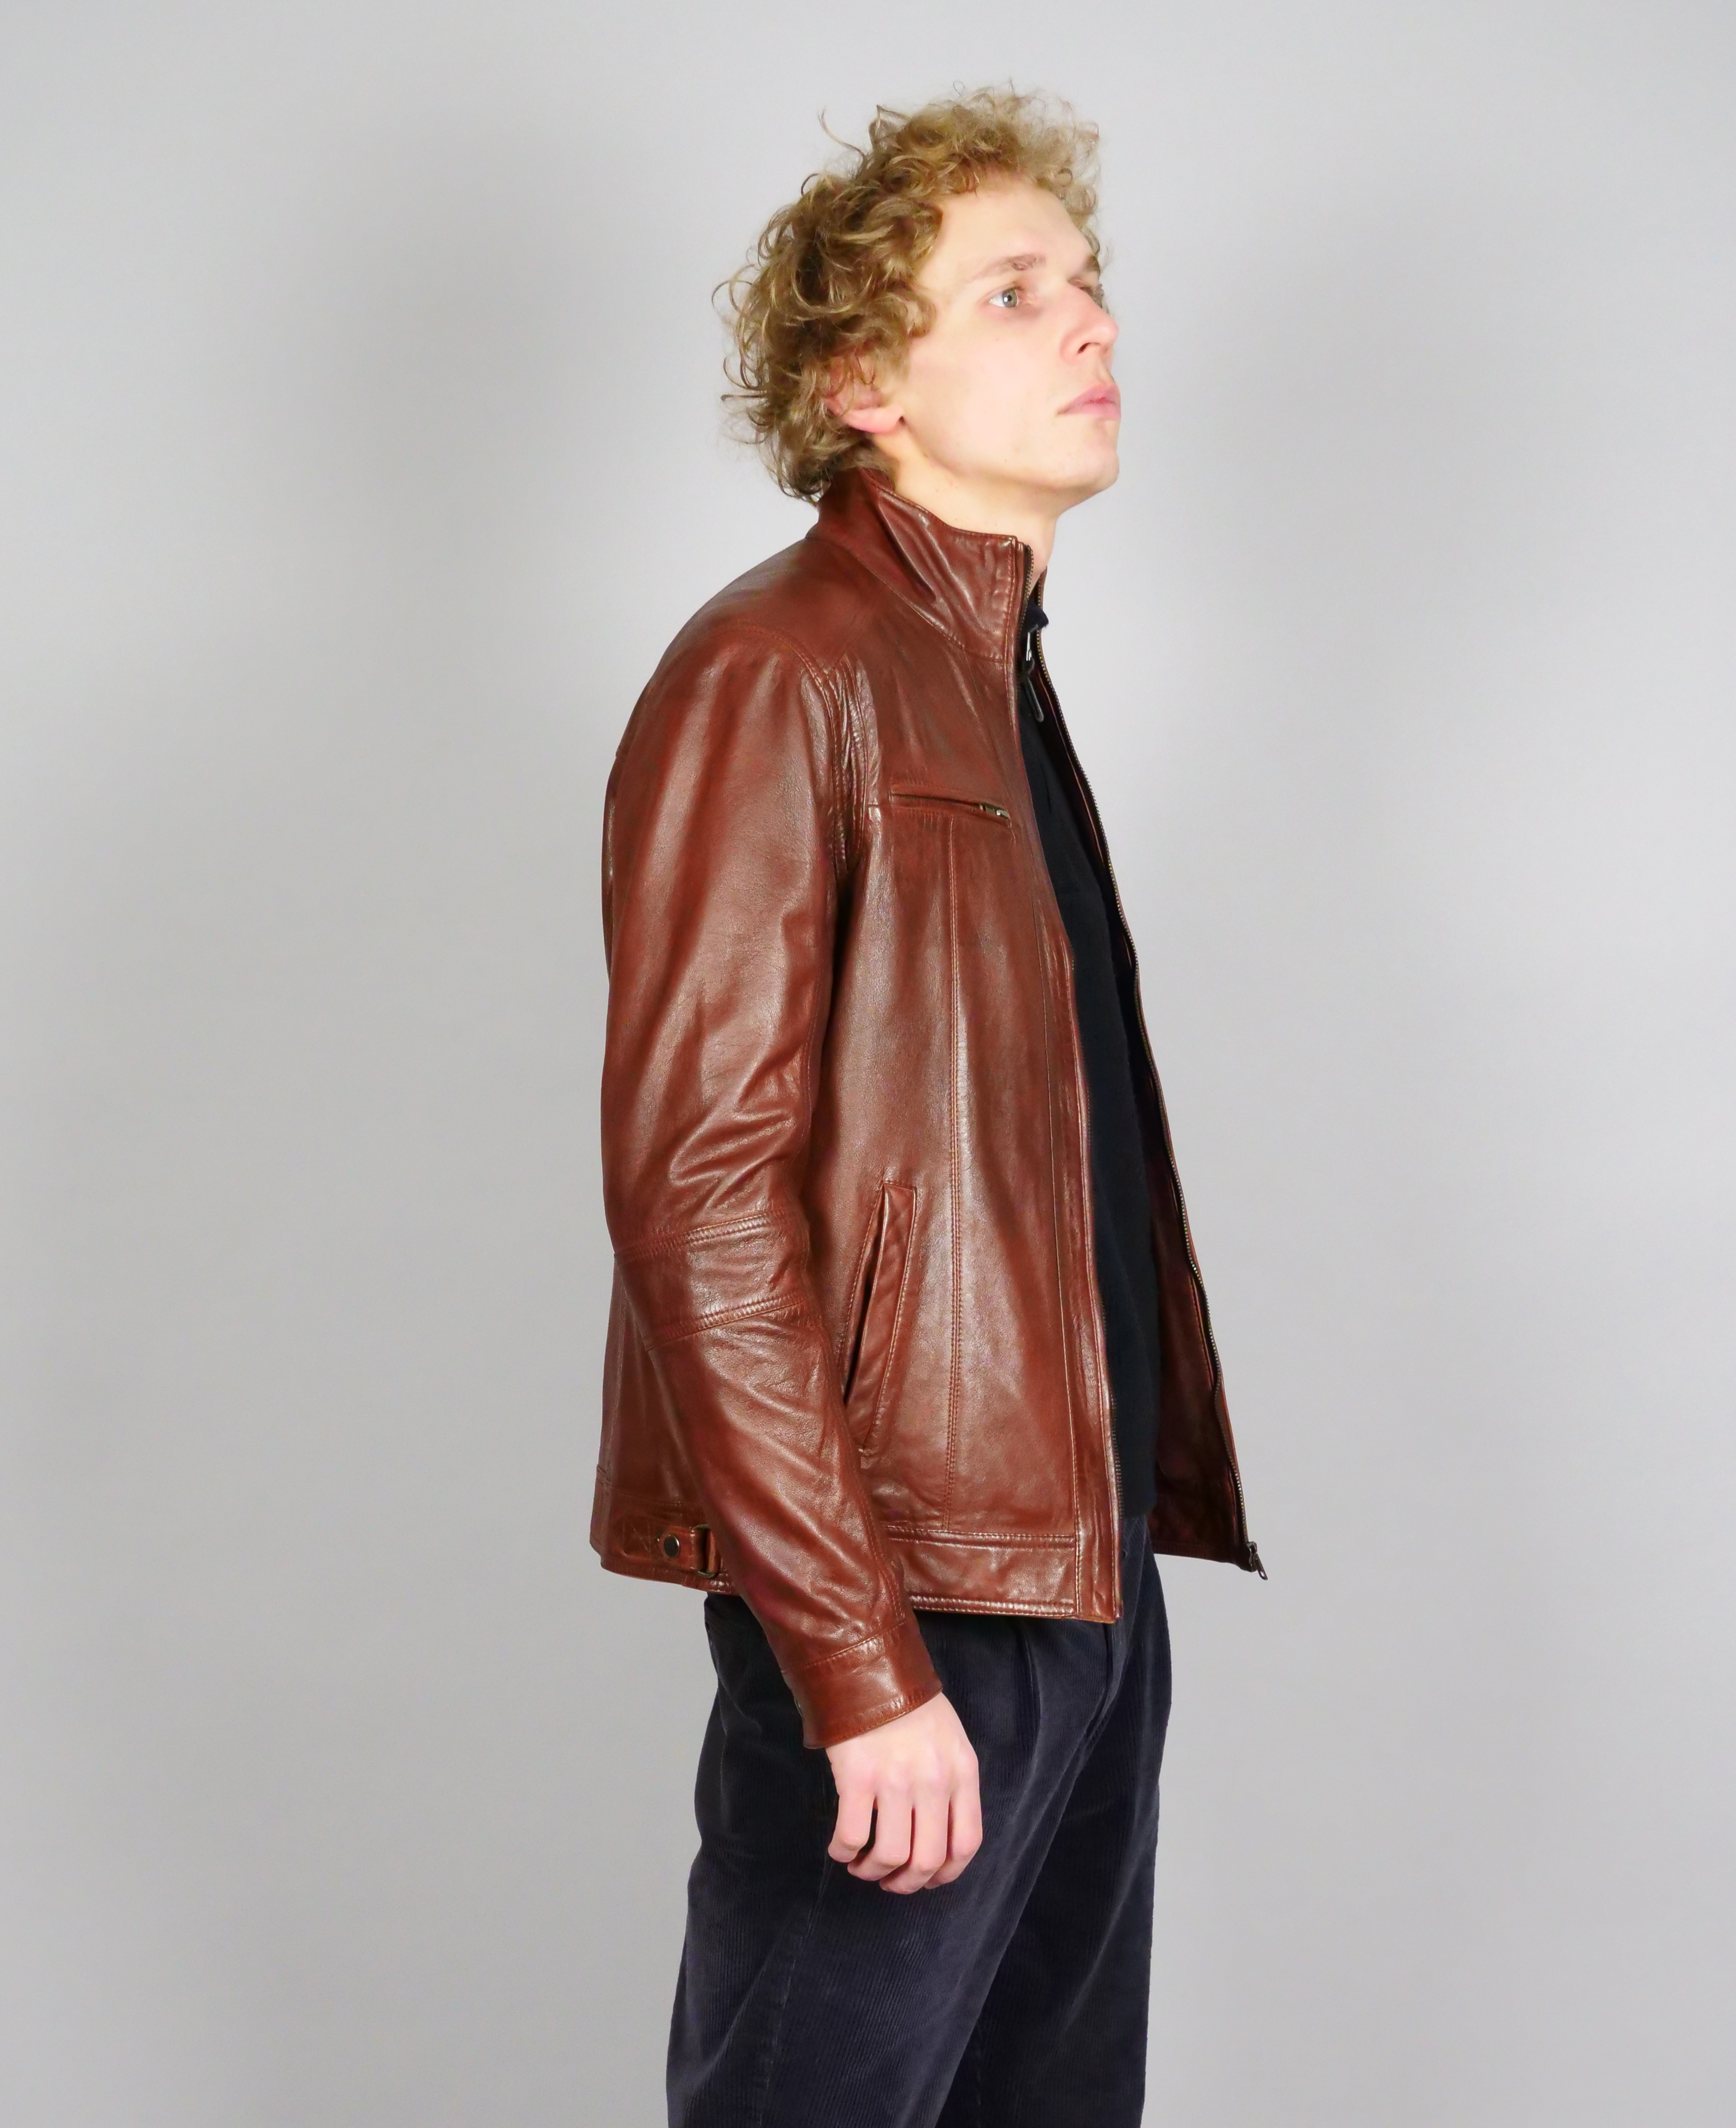 Buy IFTEKHAR Men's Casual Faux Leather Jacket #SS12# (L) at Amazon.in